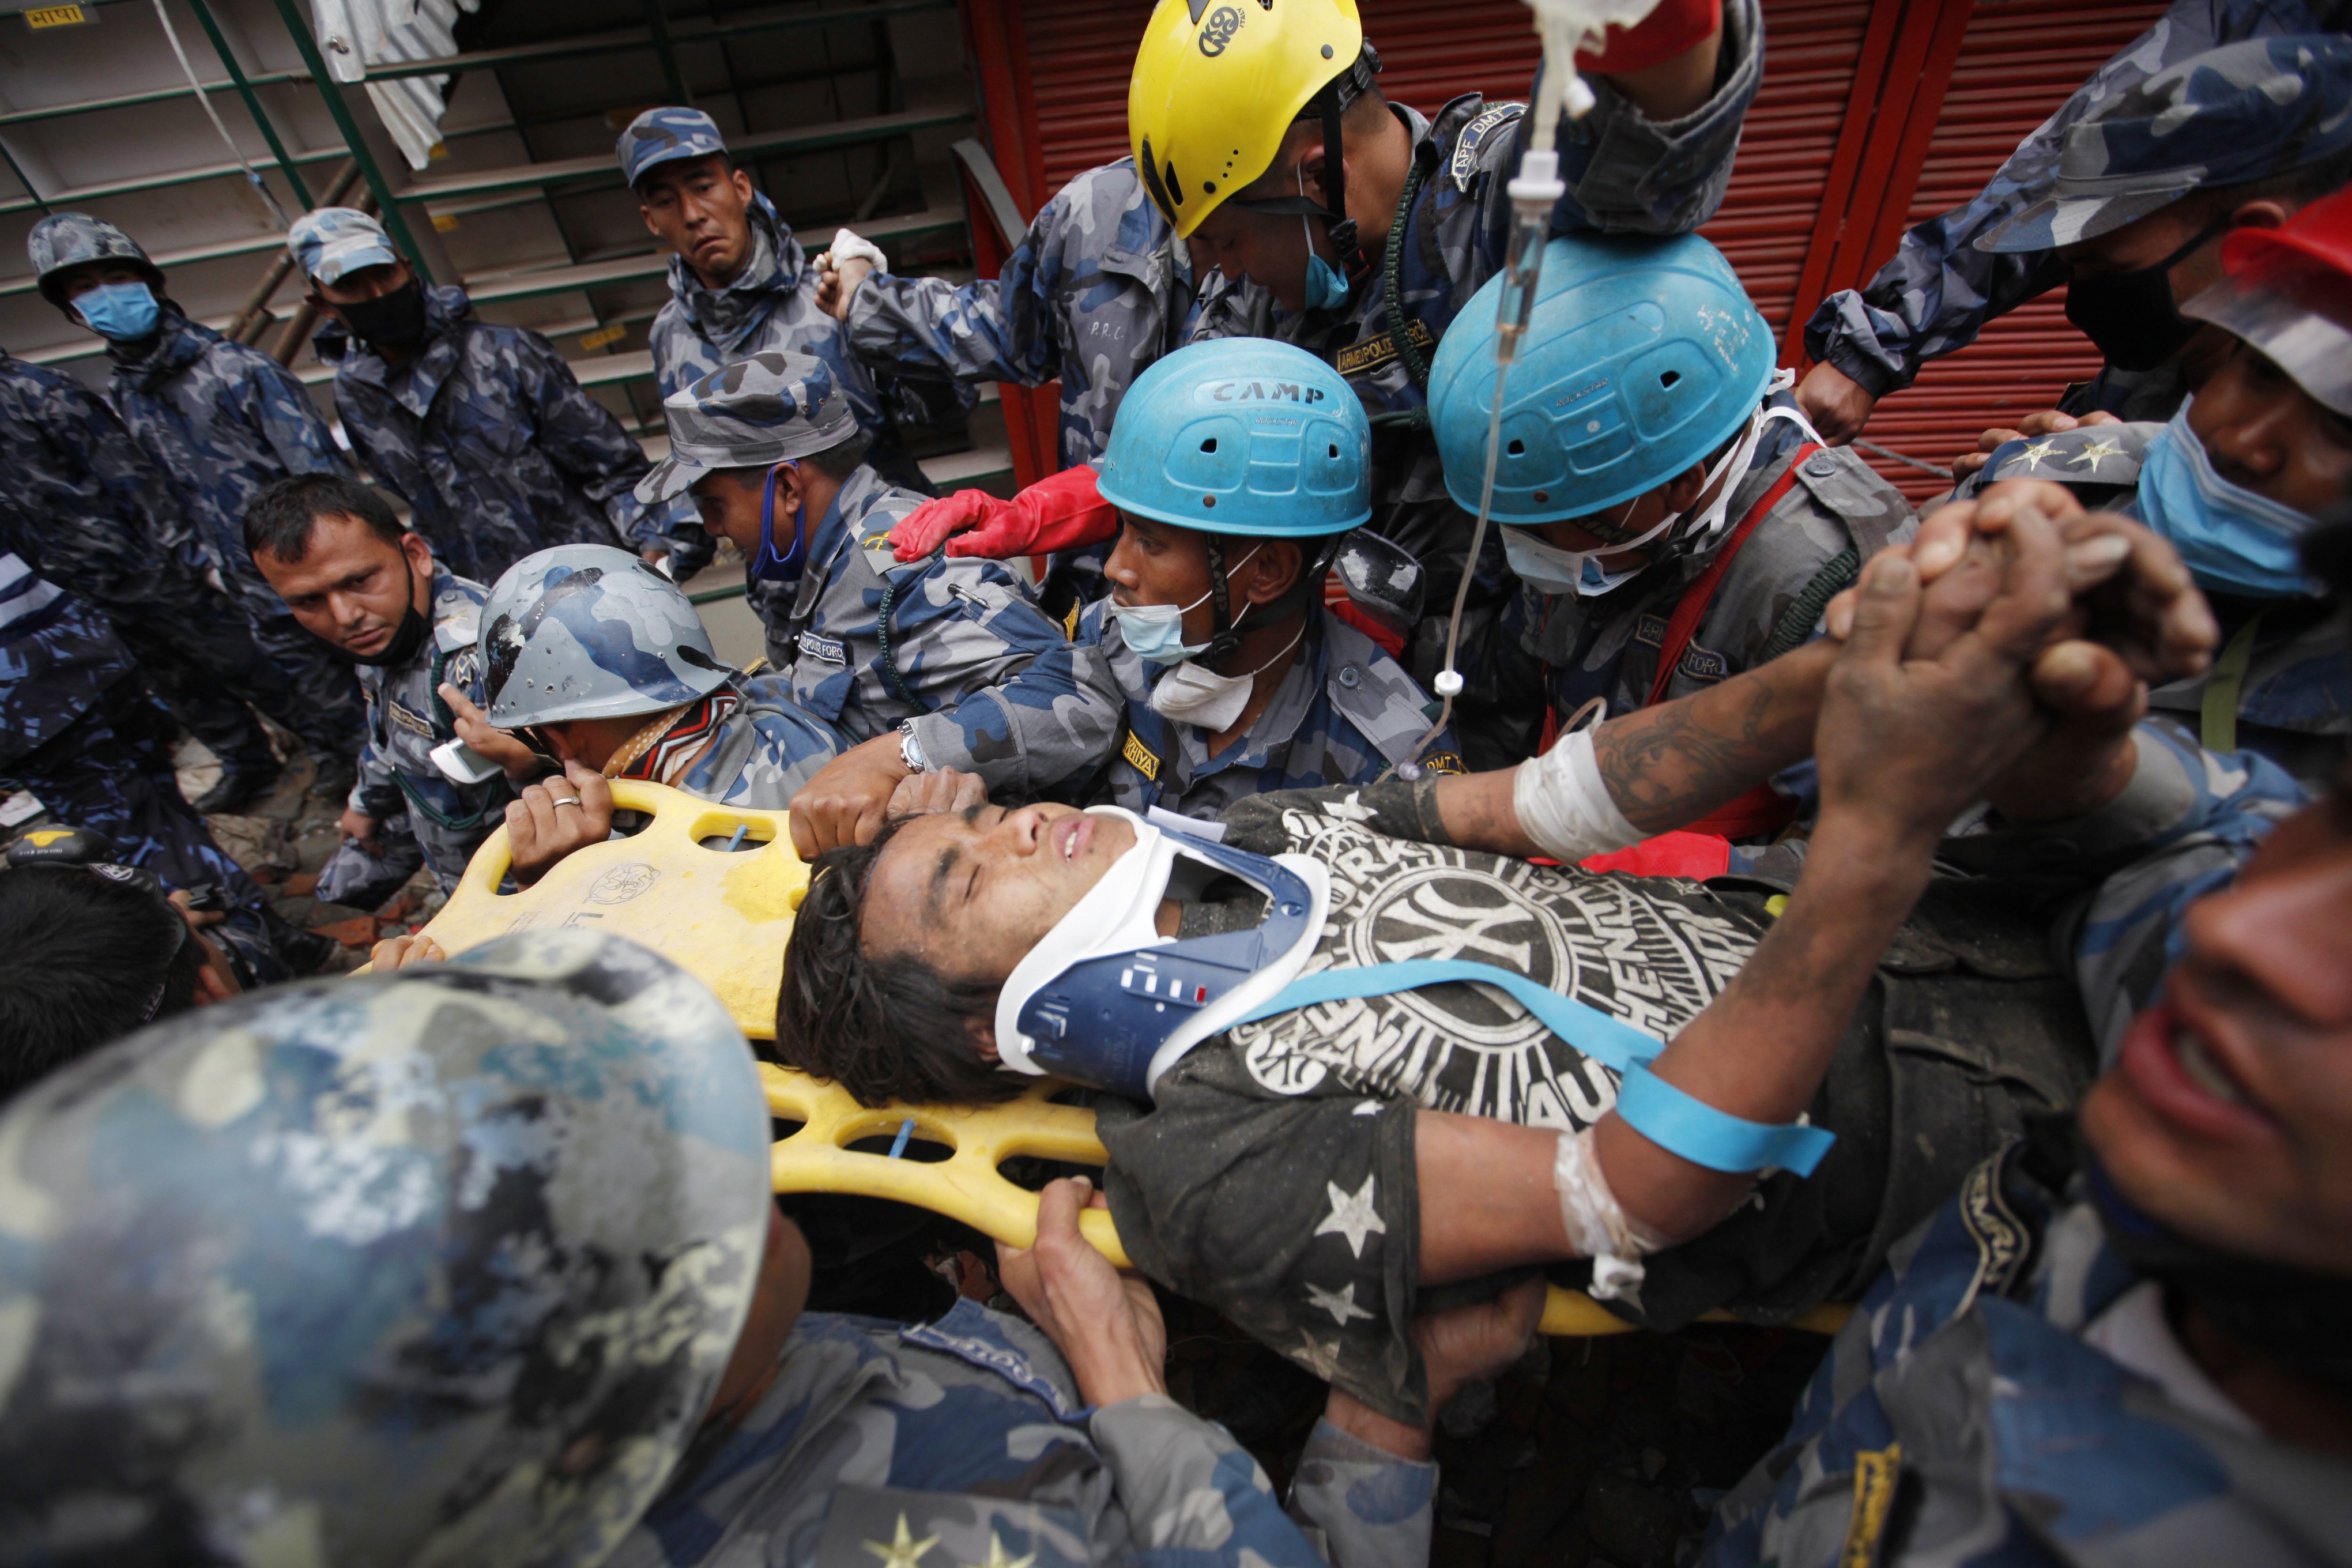 Pemba Tamang is carried on a stretcher after being rescued by Nepalese policemen and U.S. rescue workers from a building that collapsed five days ago in Kathmandu, Nepal on April 30, 2015.